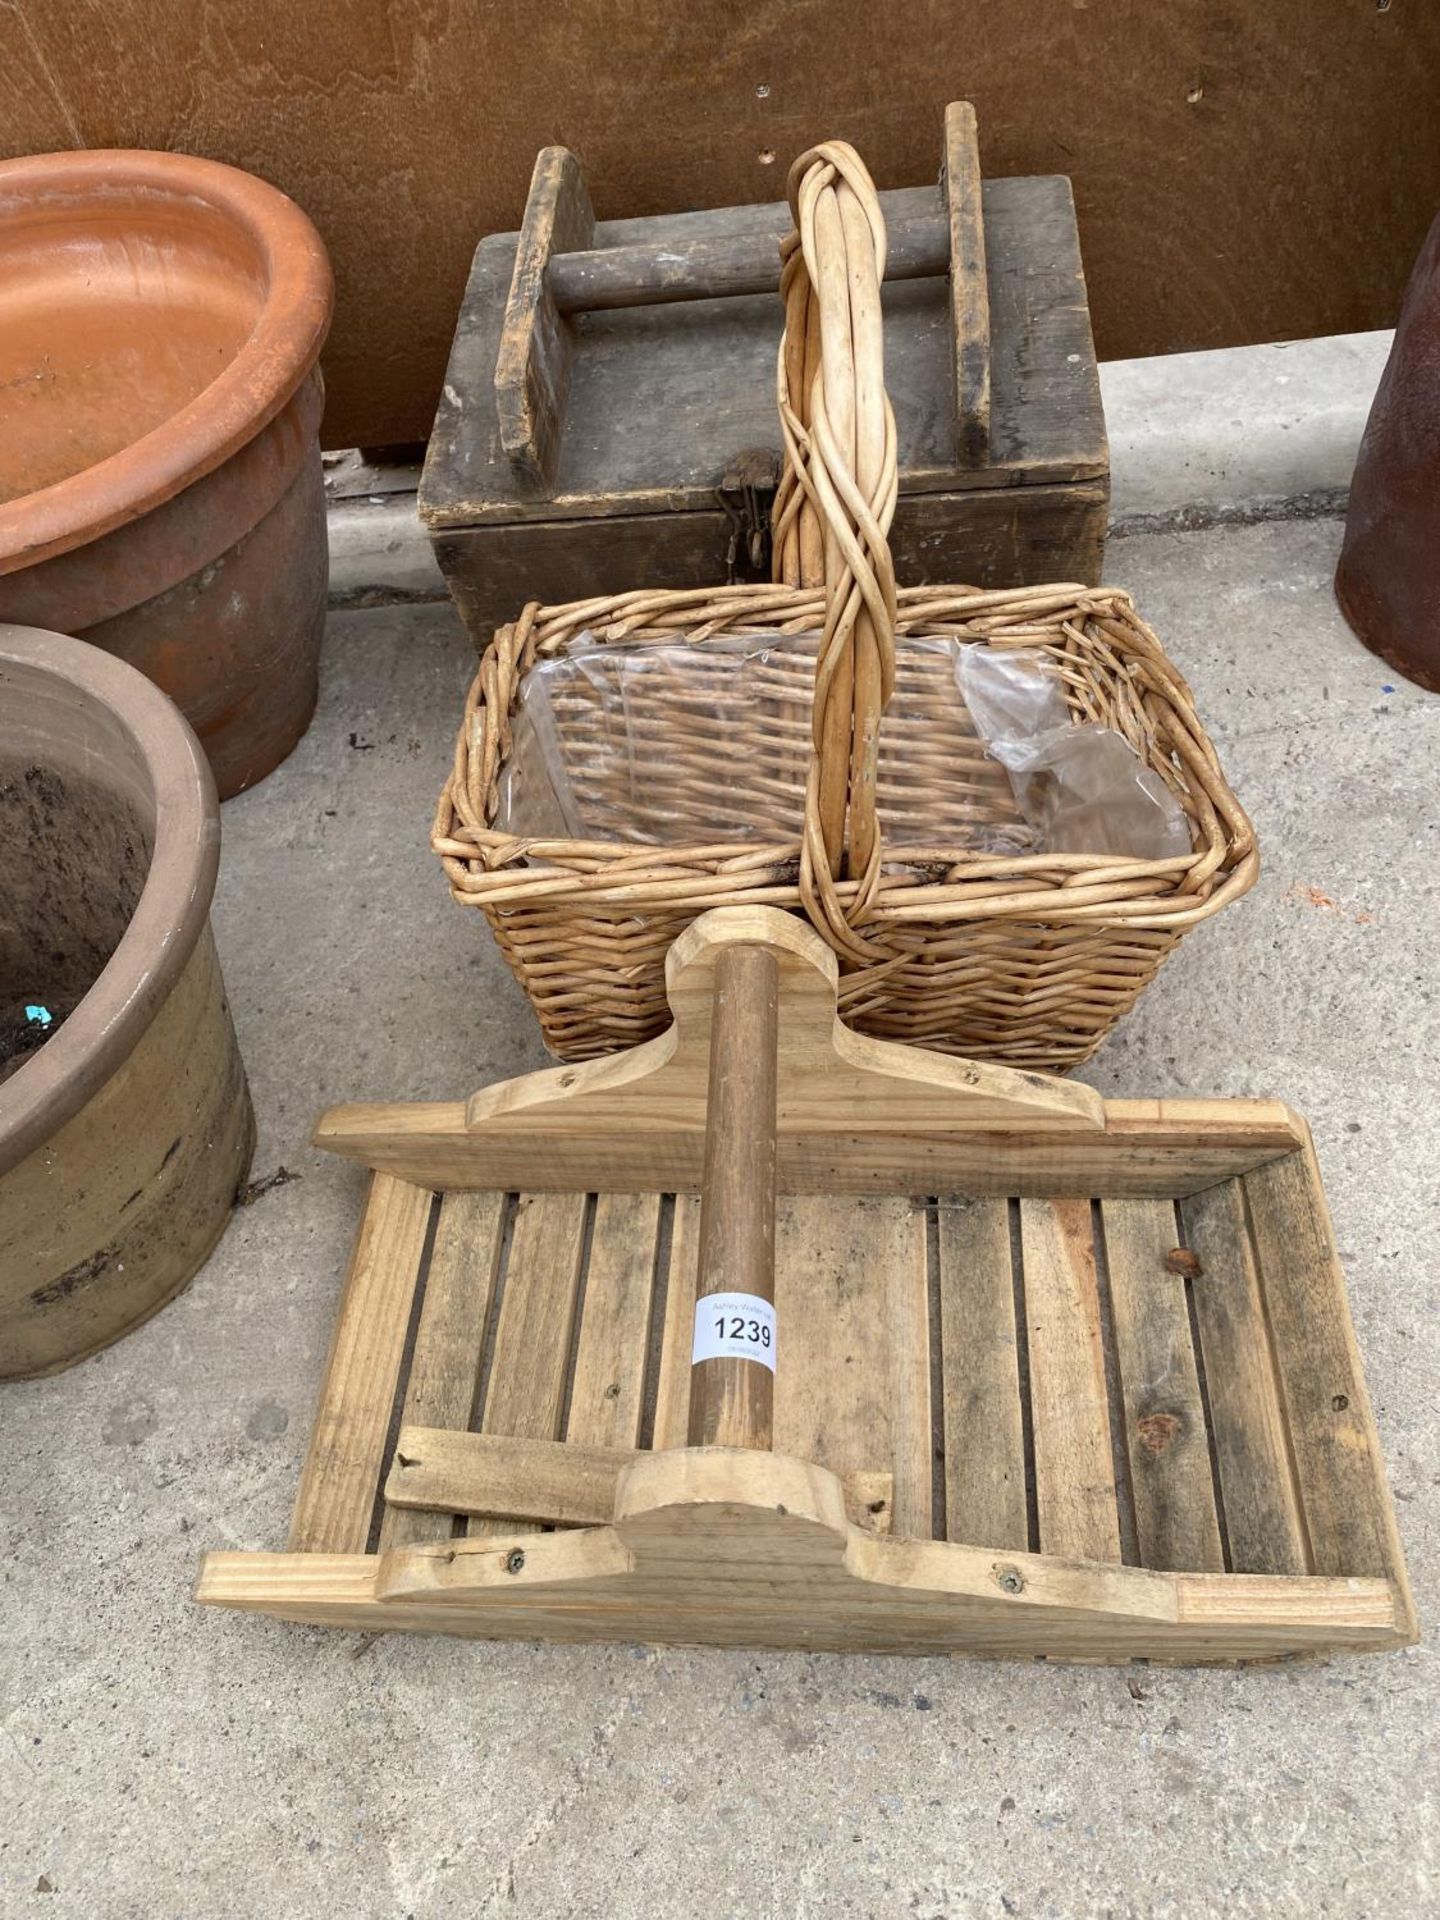 A VINTAGE WOODEN TOOL CHEST, A WICKER BASKET AND A WOODEN BASKET